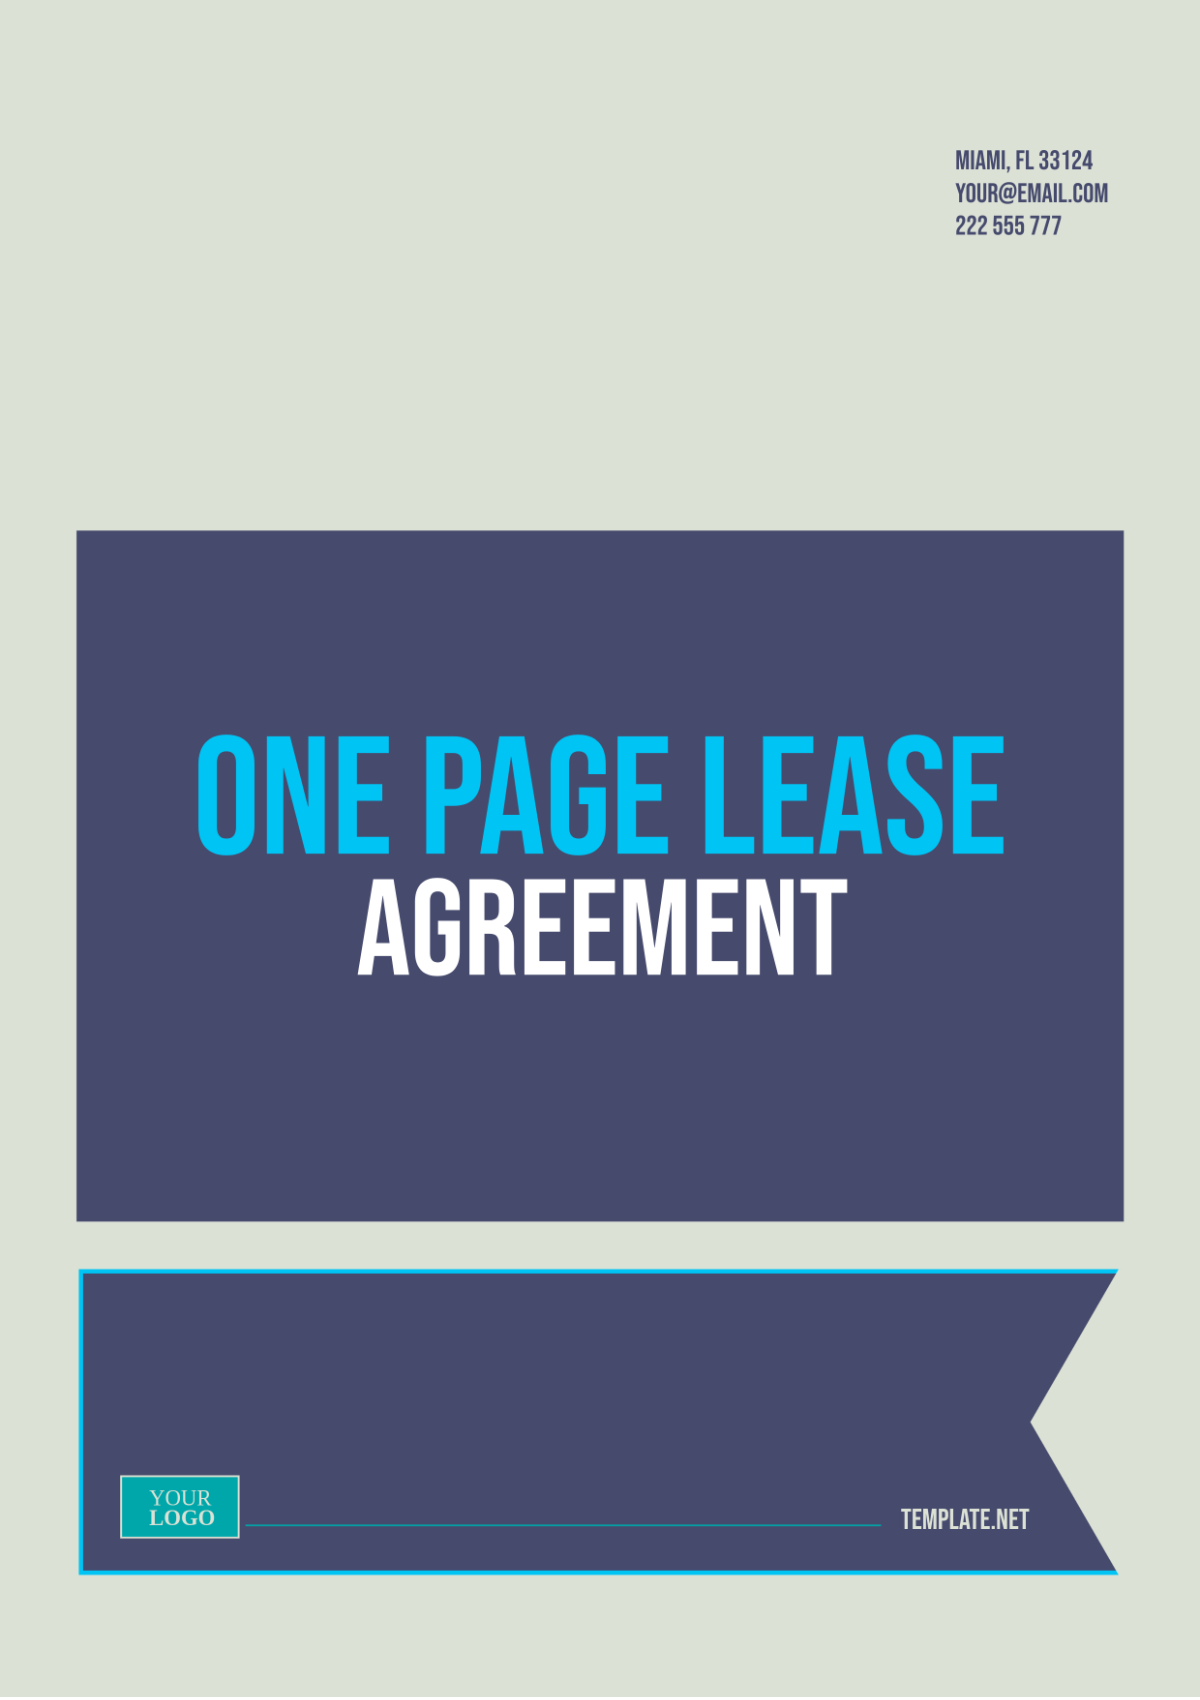 One Page Lease Agreement Template